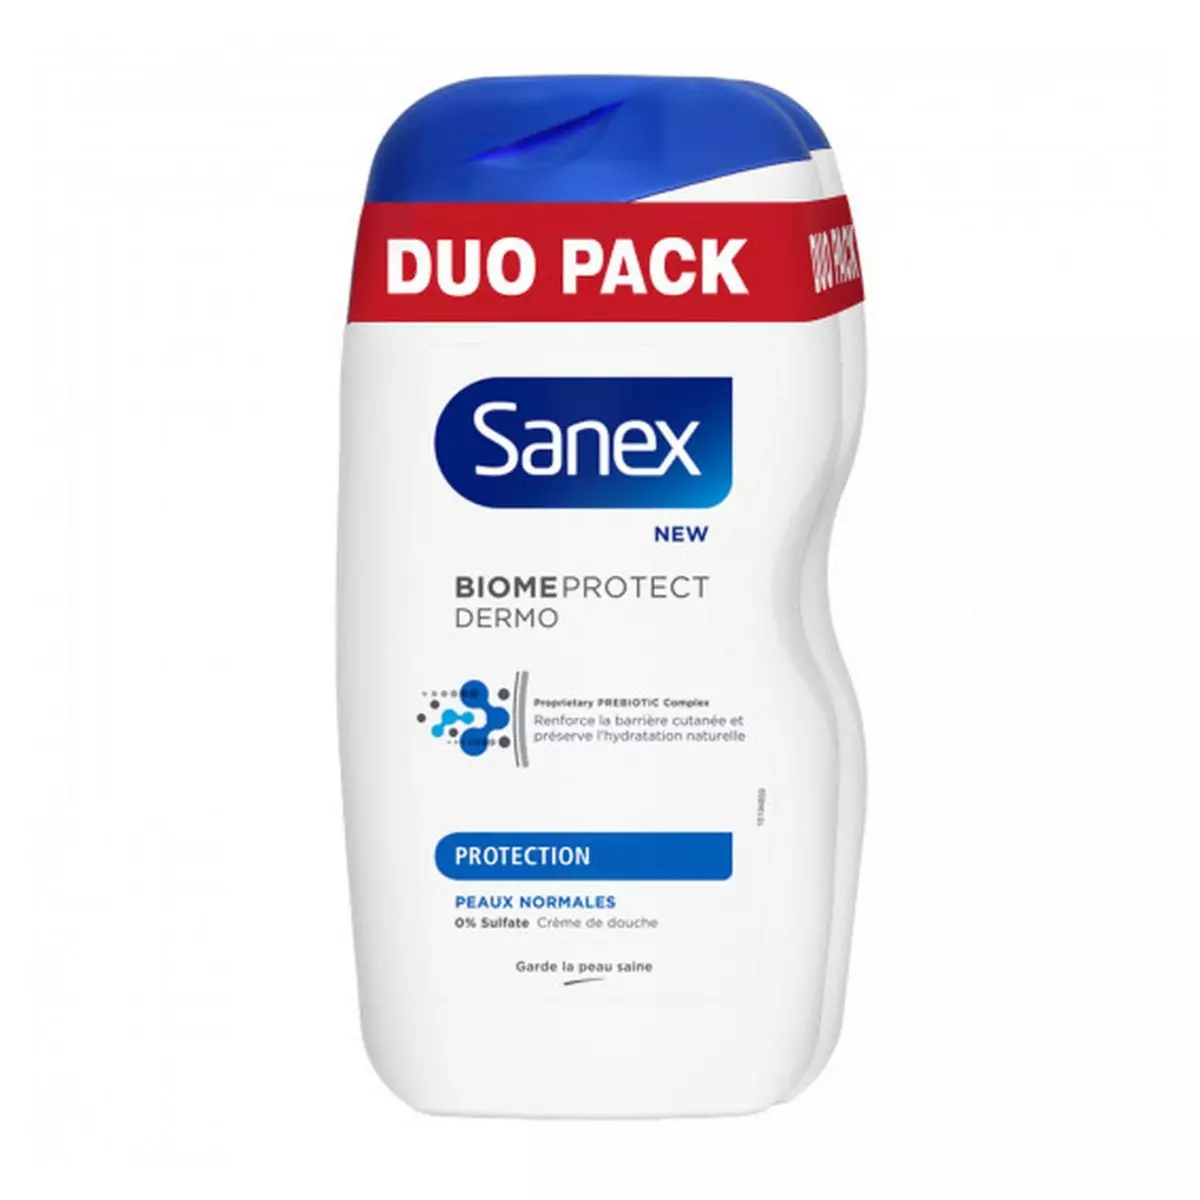 SANEX Biome Protect Dermo Gel douche protection peaux normales 2x450ml